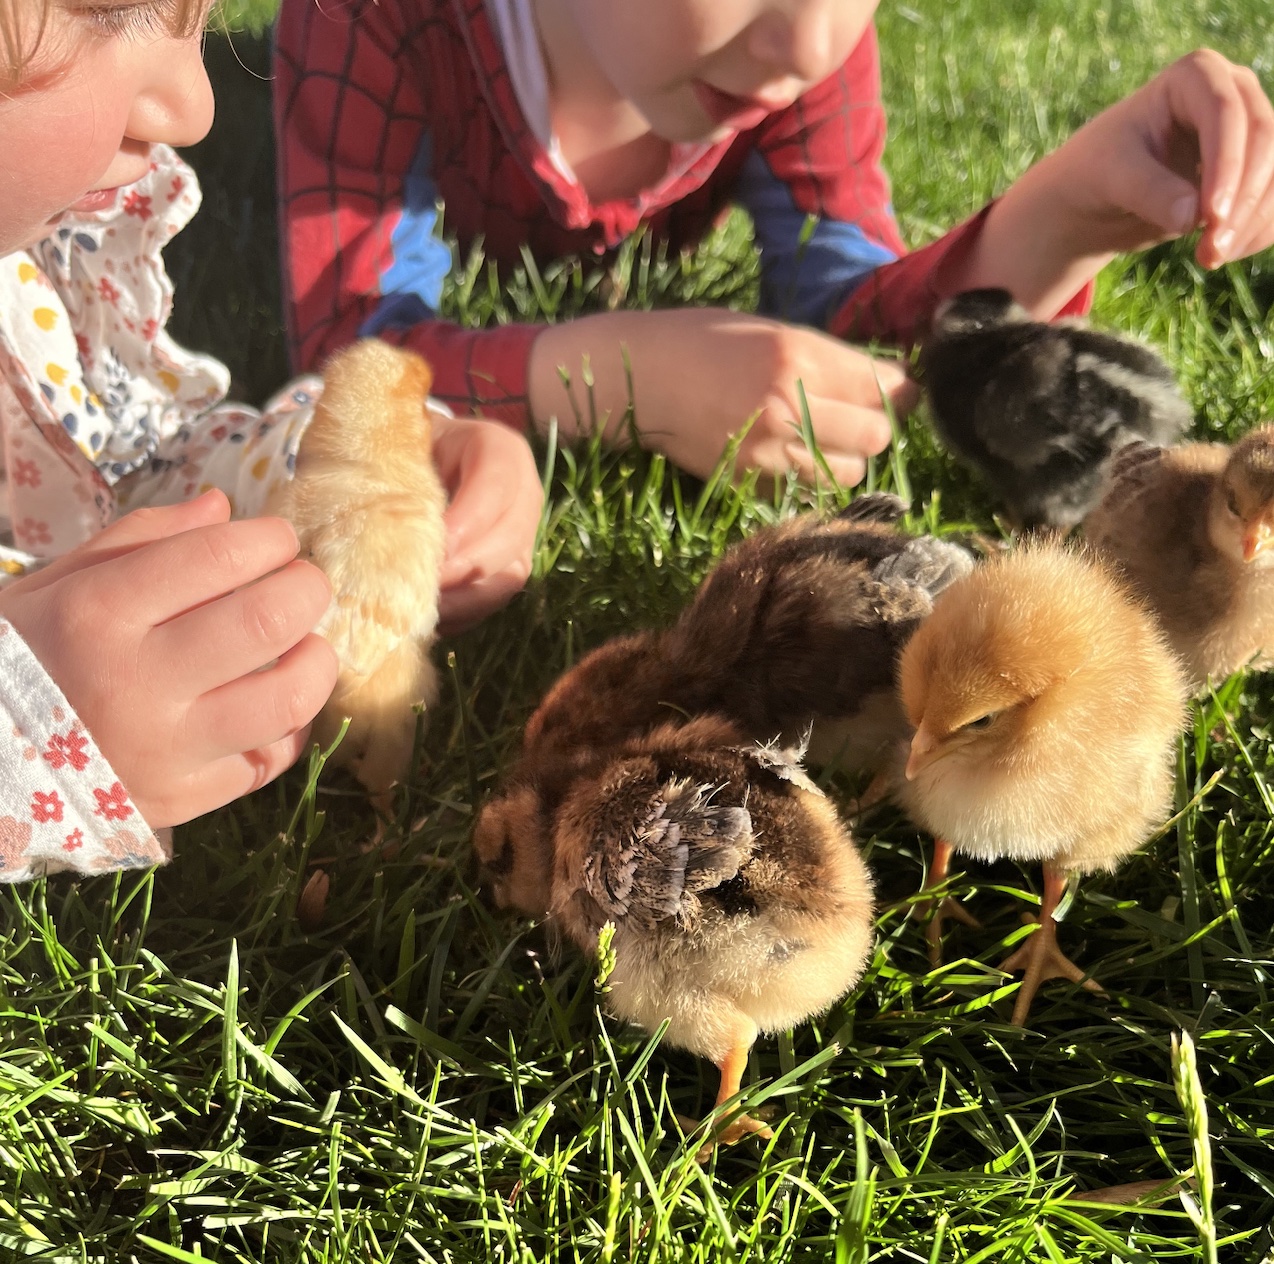 McMurray Hatchery Blog | Brooding Backyard Chicks in the Summer